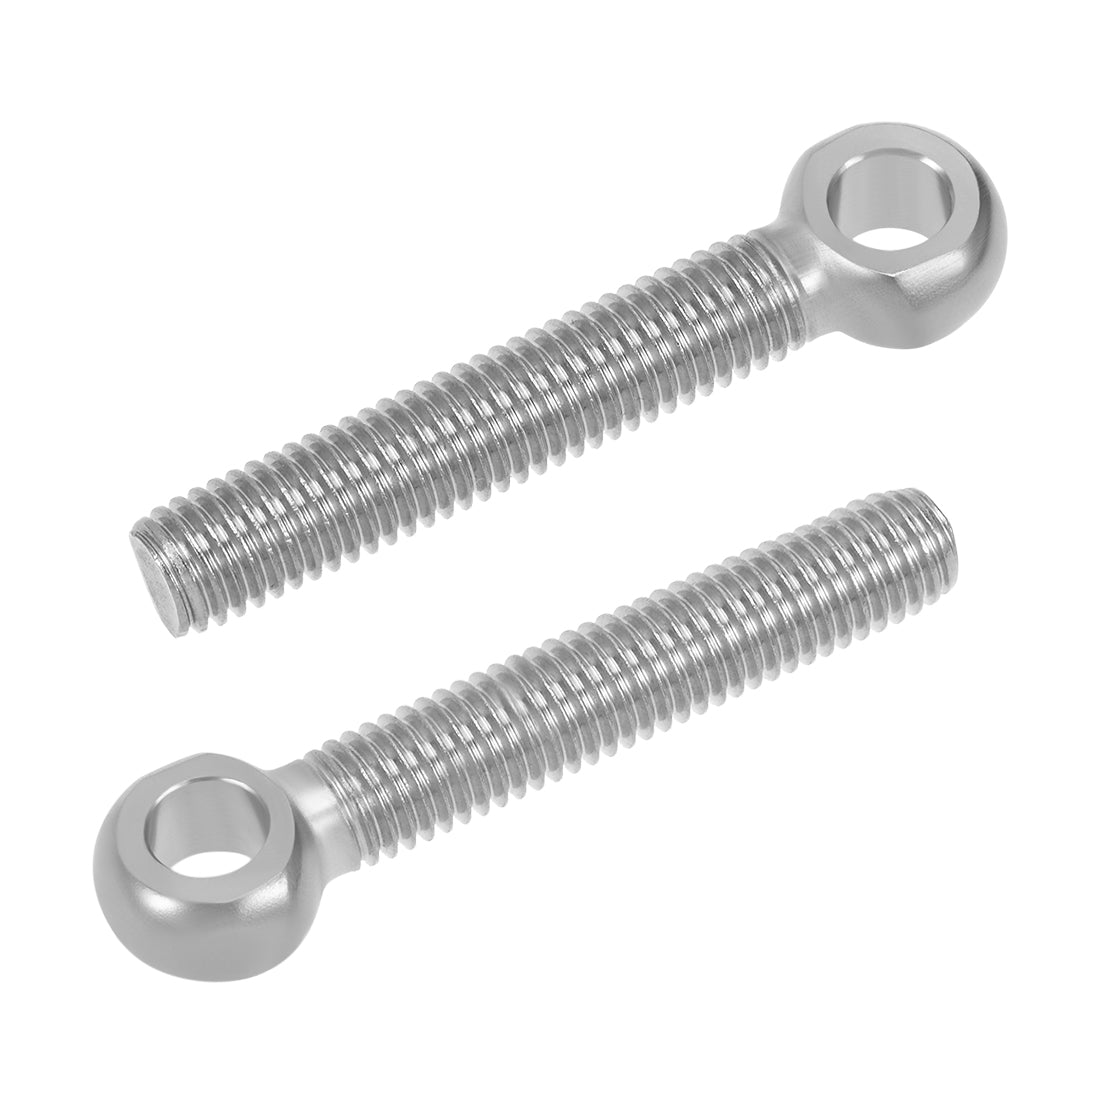 uxcell Uxcell M10 x 60mm Machinery Shoulder Swing Lifting Eye Bolt 304 Stainless Steel 2pcs